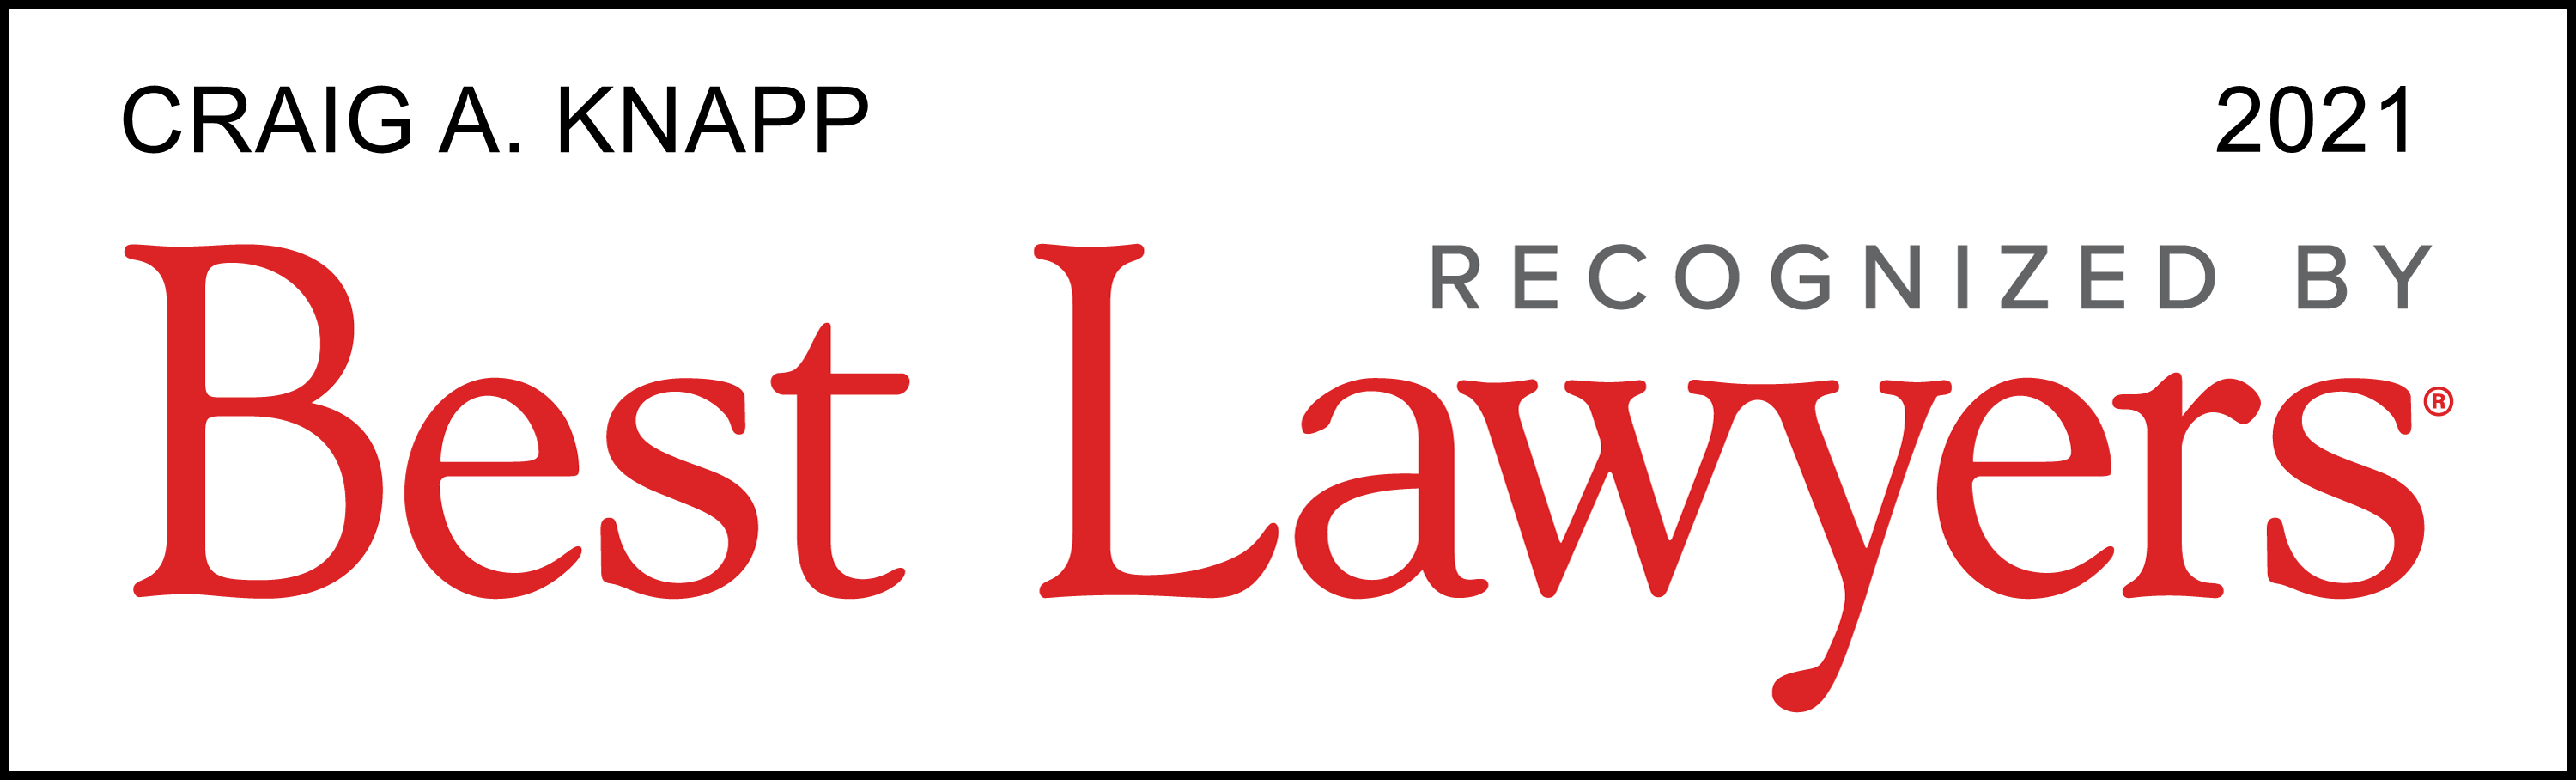 Recognized by Best Lawyers 2021